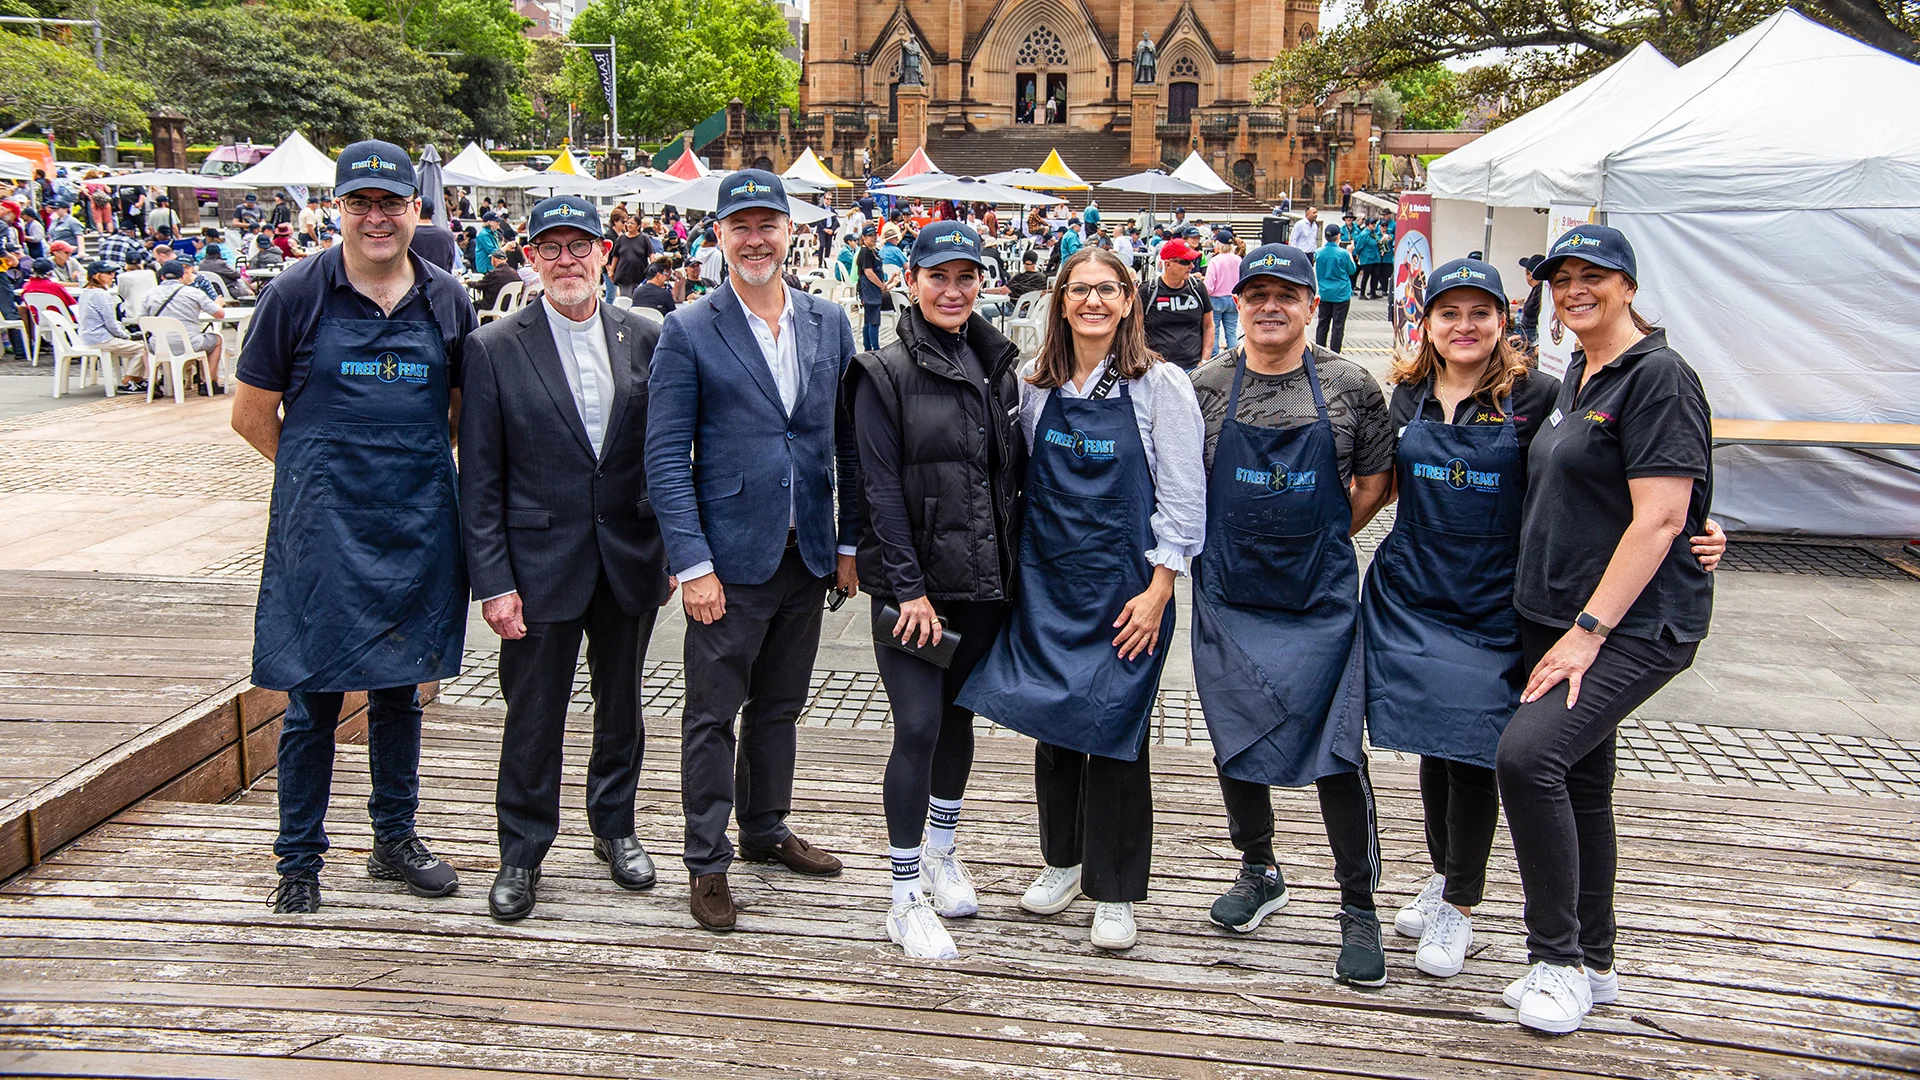 Community Spirit alive and well at Sydney Street Feast